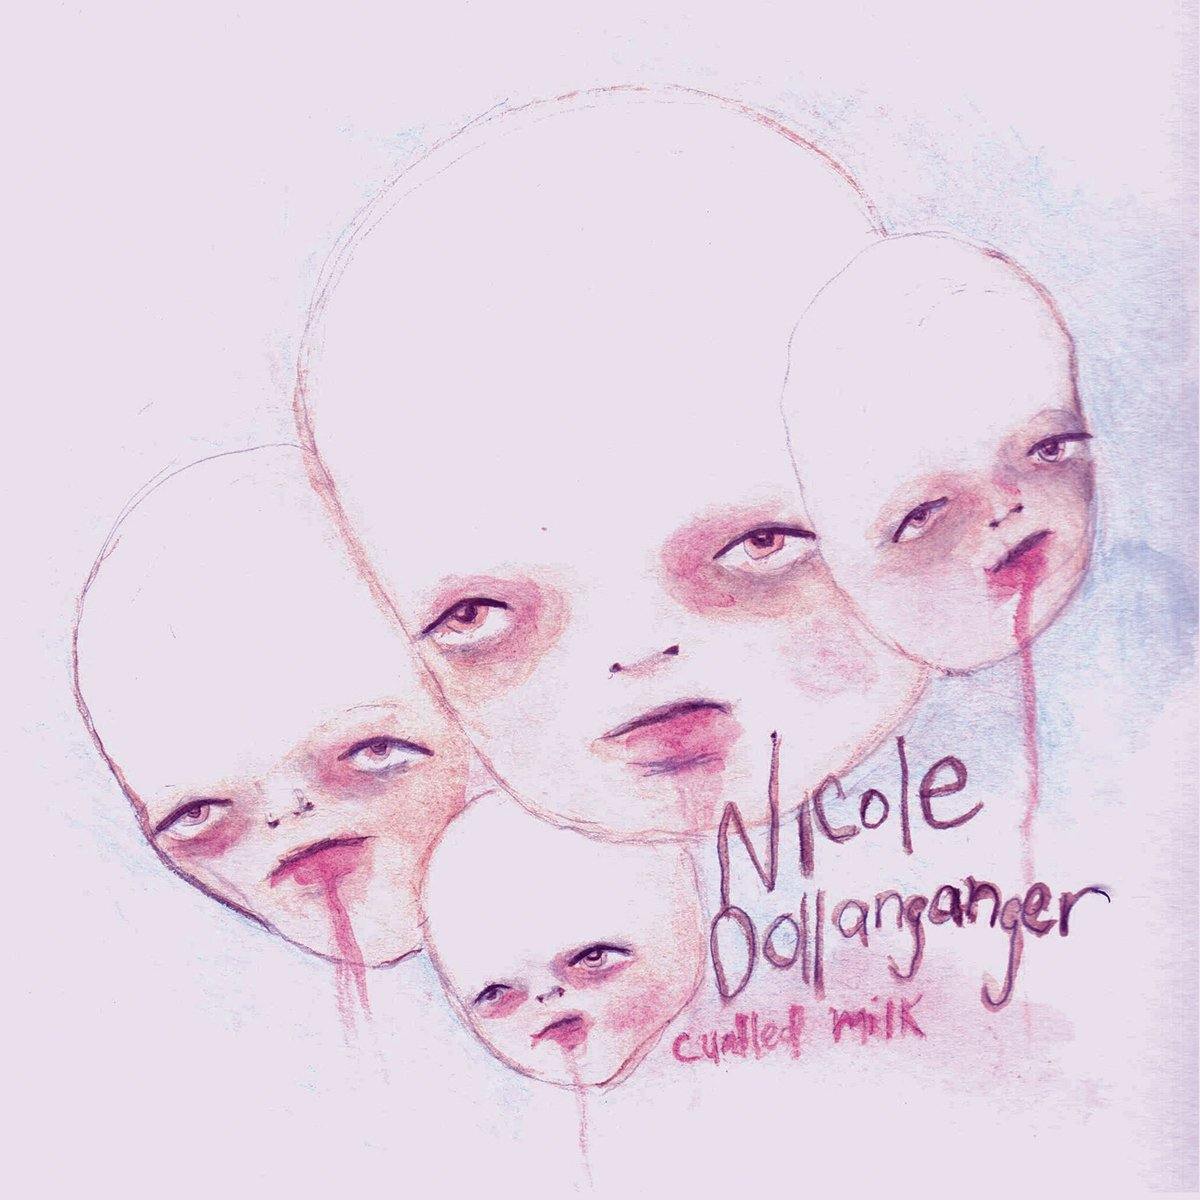 Buy – Nicole Dollanganger "Curdled Milk" Digital Download – Band & Music Merch – Cold Cuts Merch